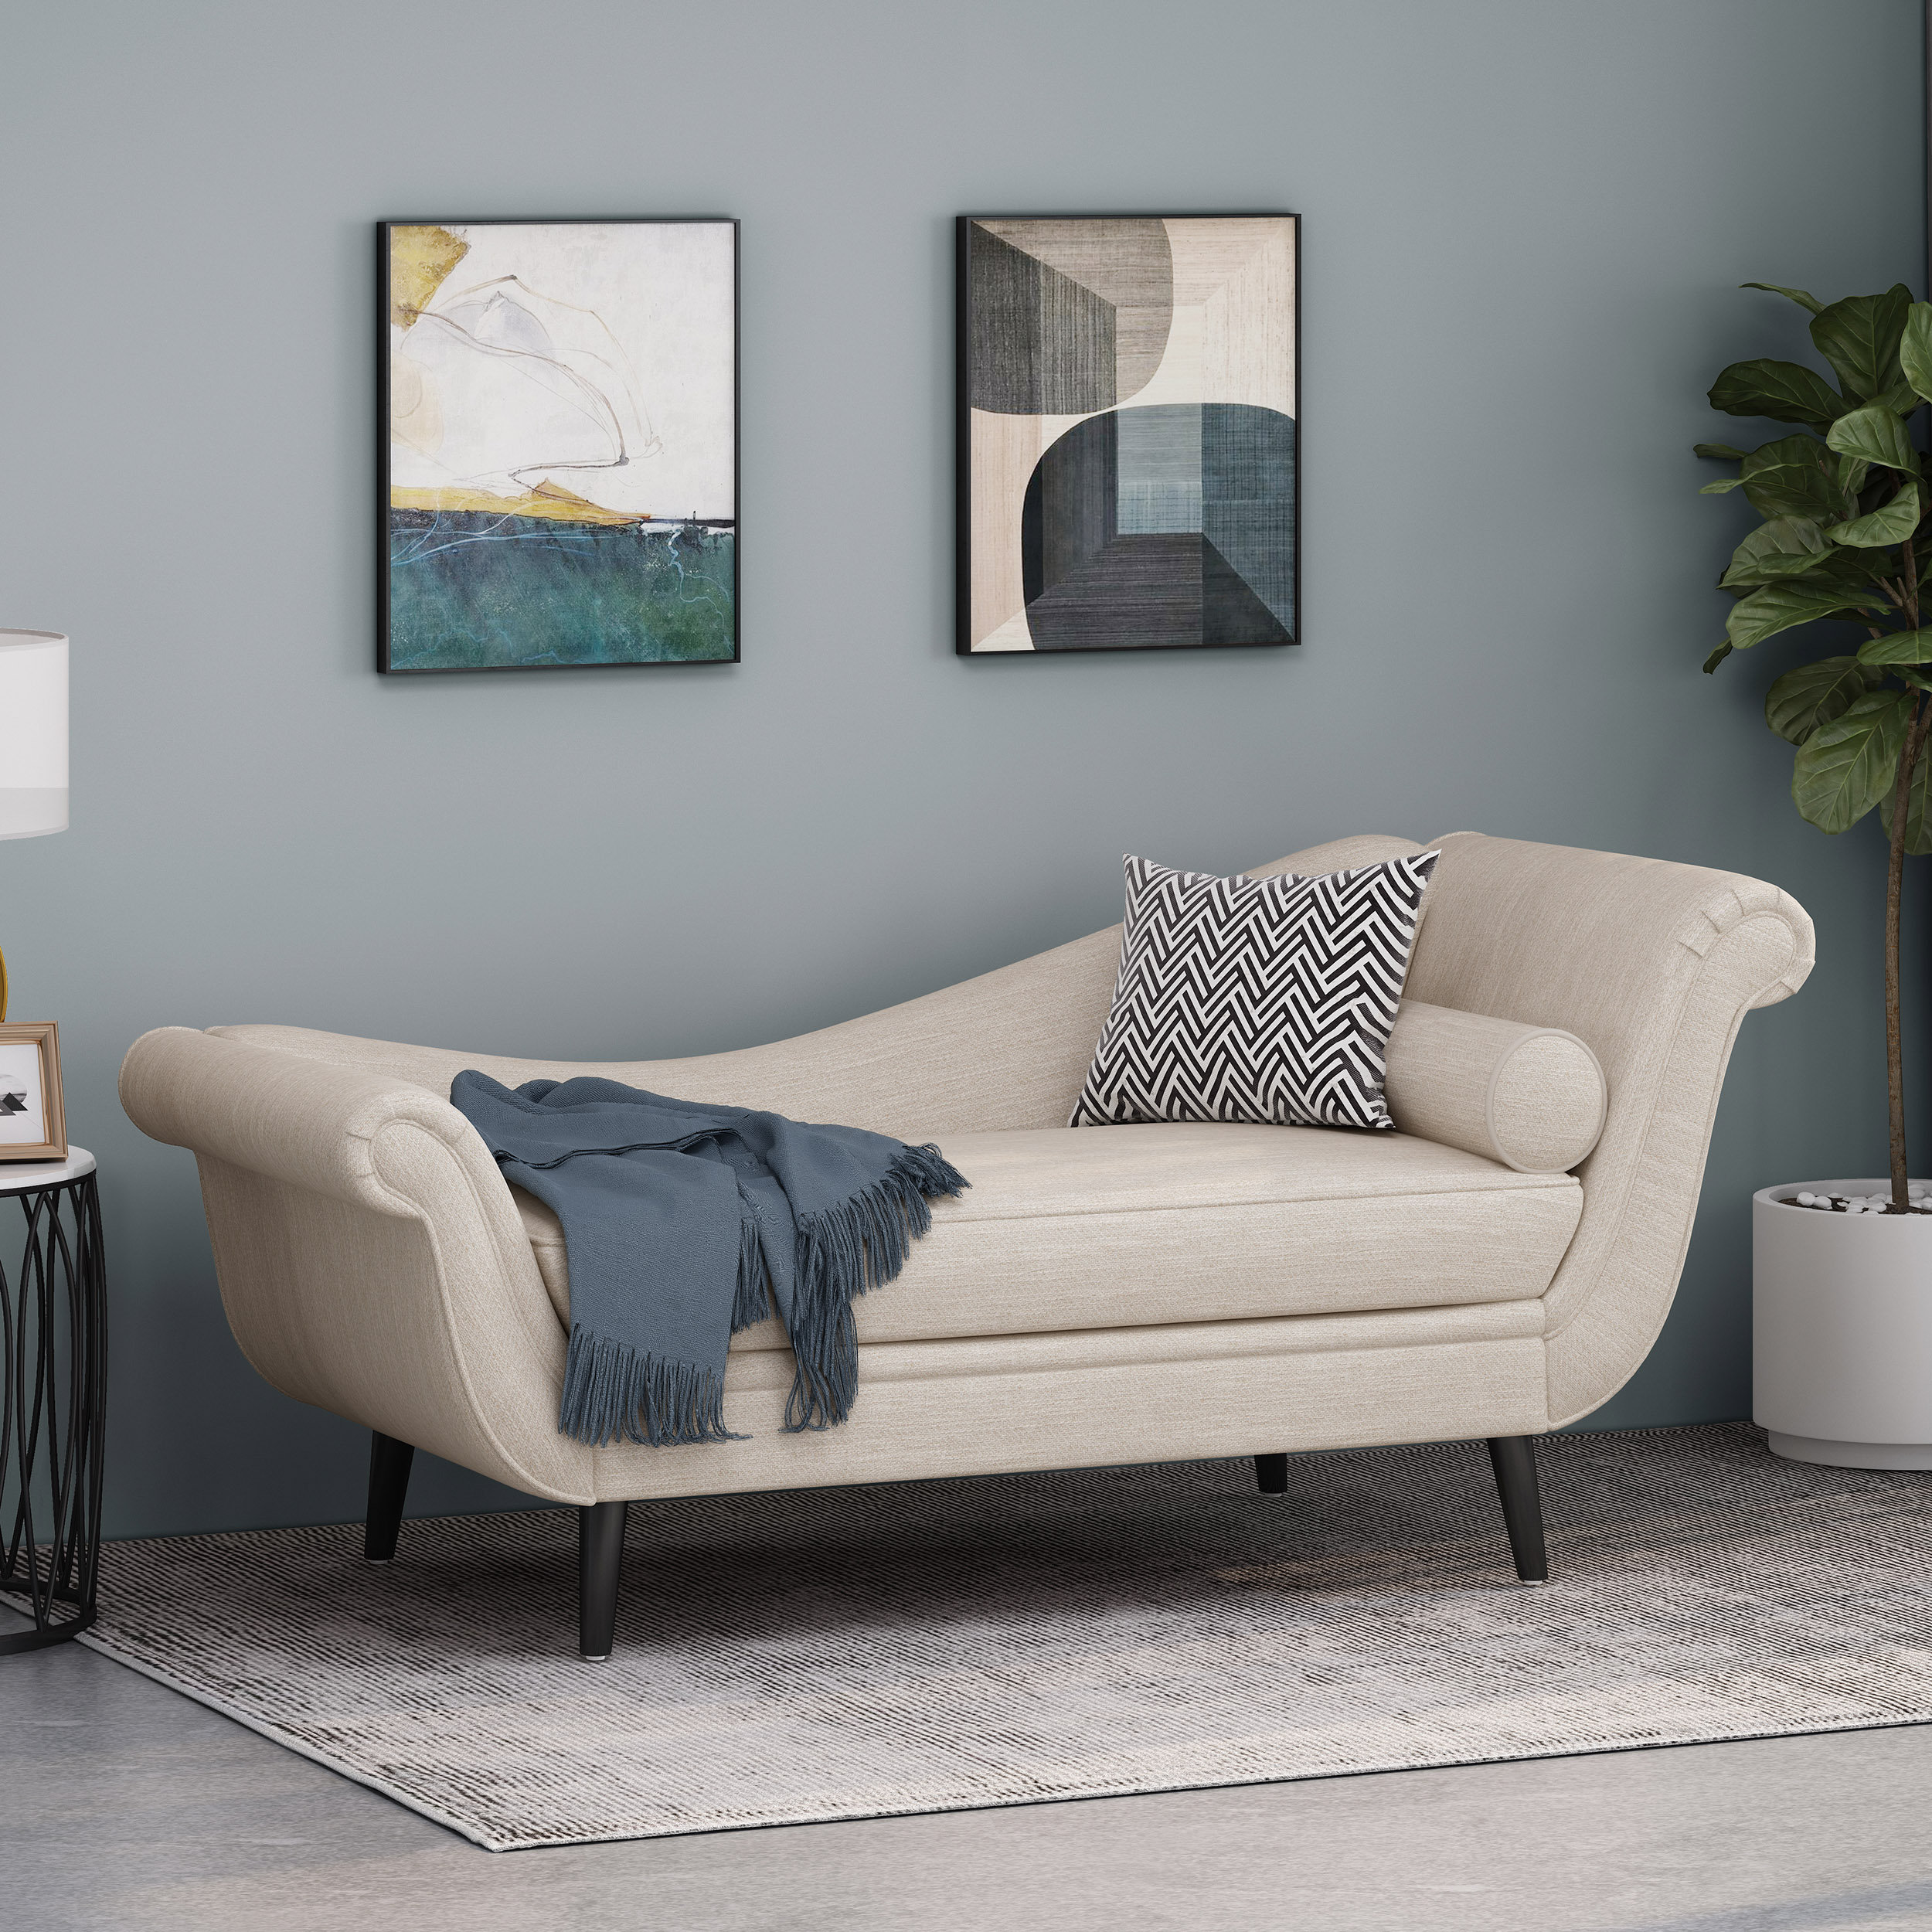 Everly Quinn Upholstered Chaise Lounge & Reviews